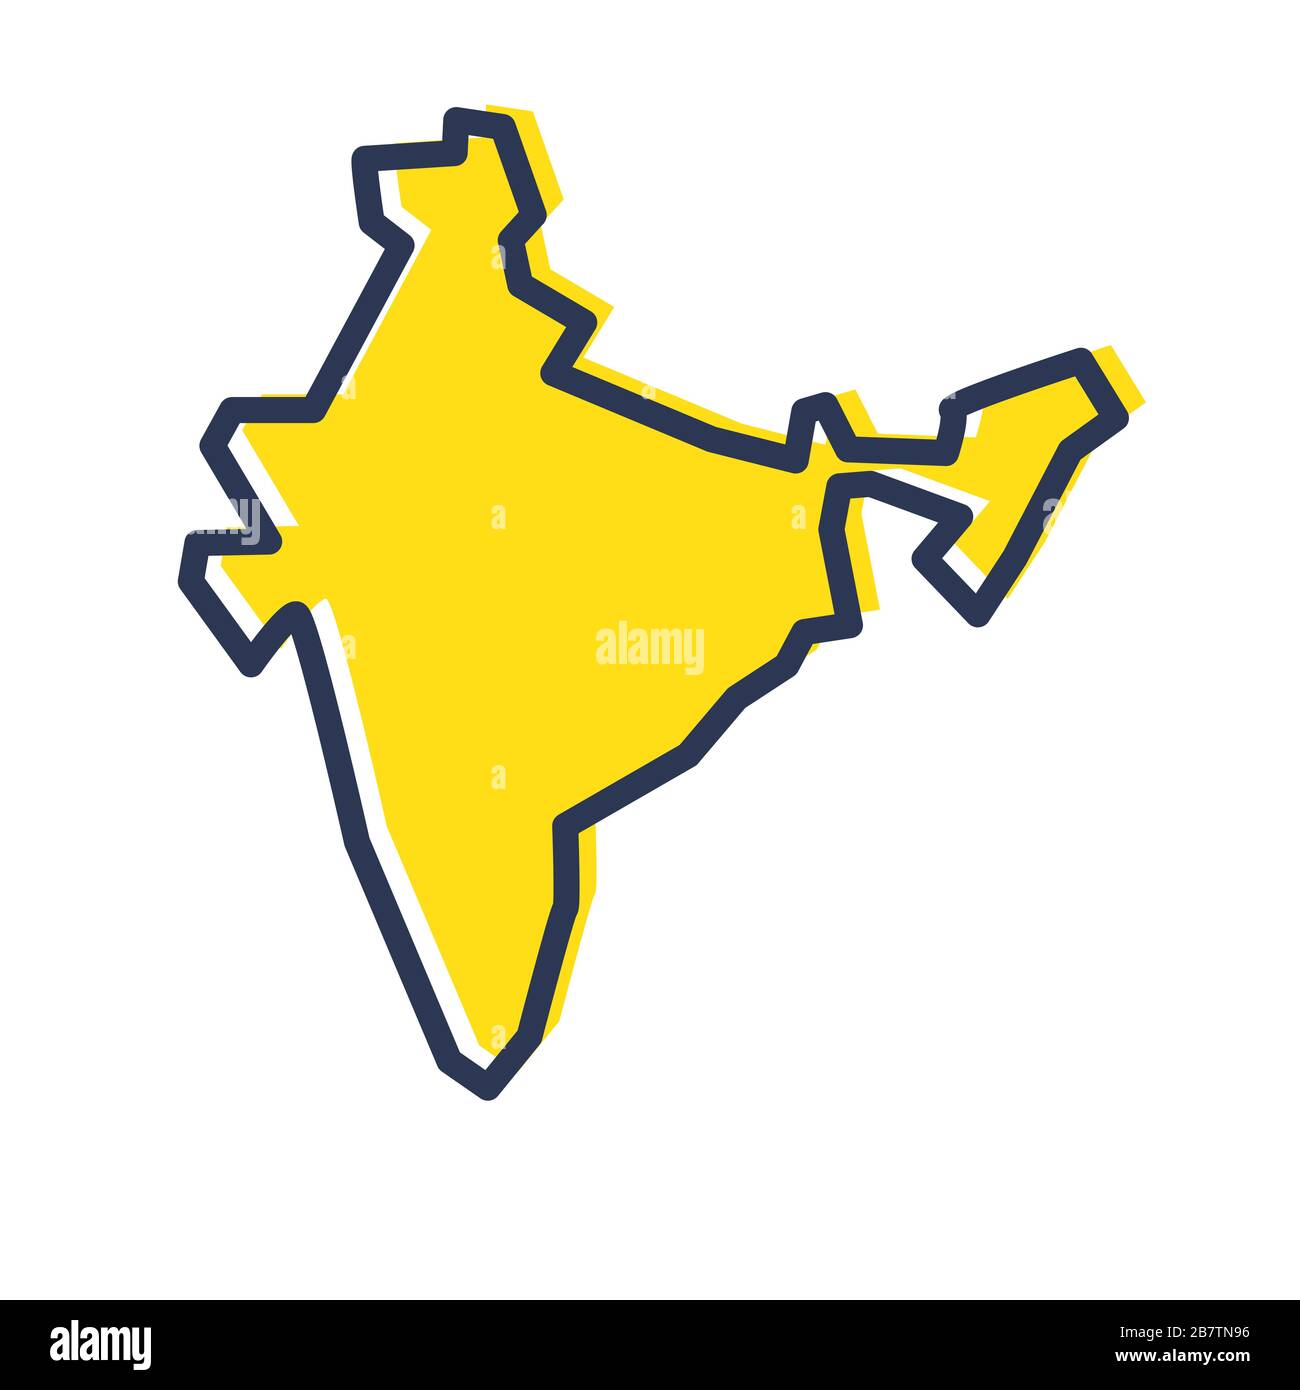 Stylized simple yellow outline map of India Stock Vector Image